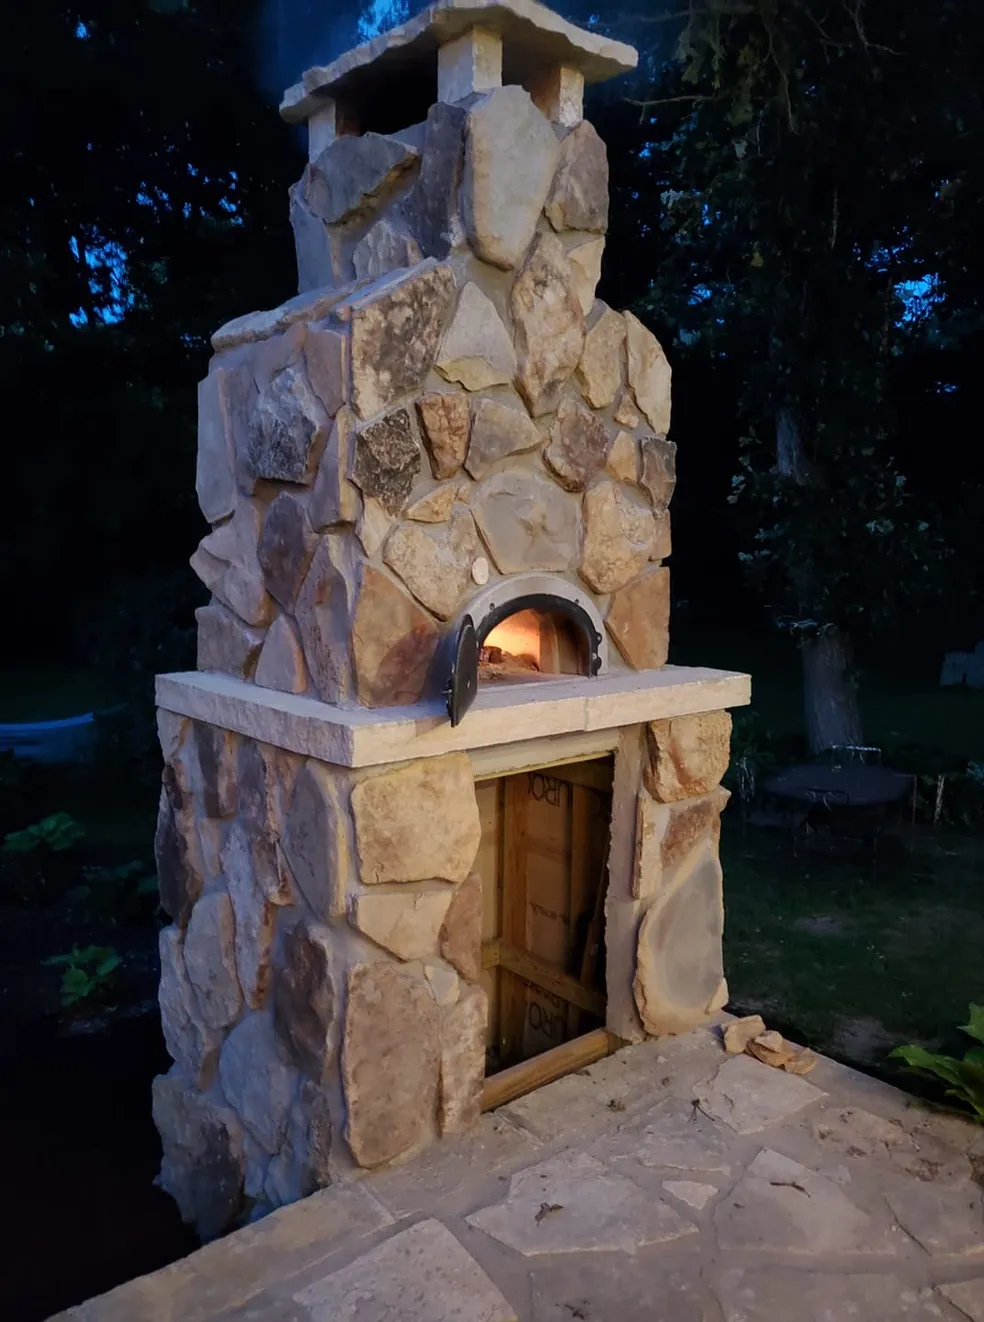 A stone fireplace with an oven built into it.